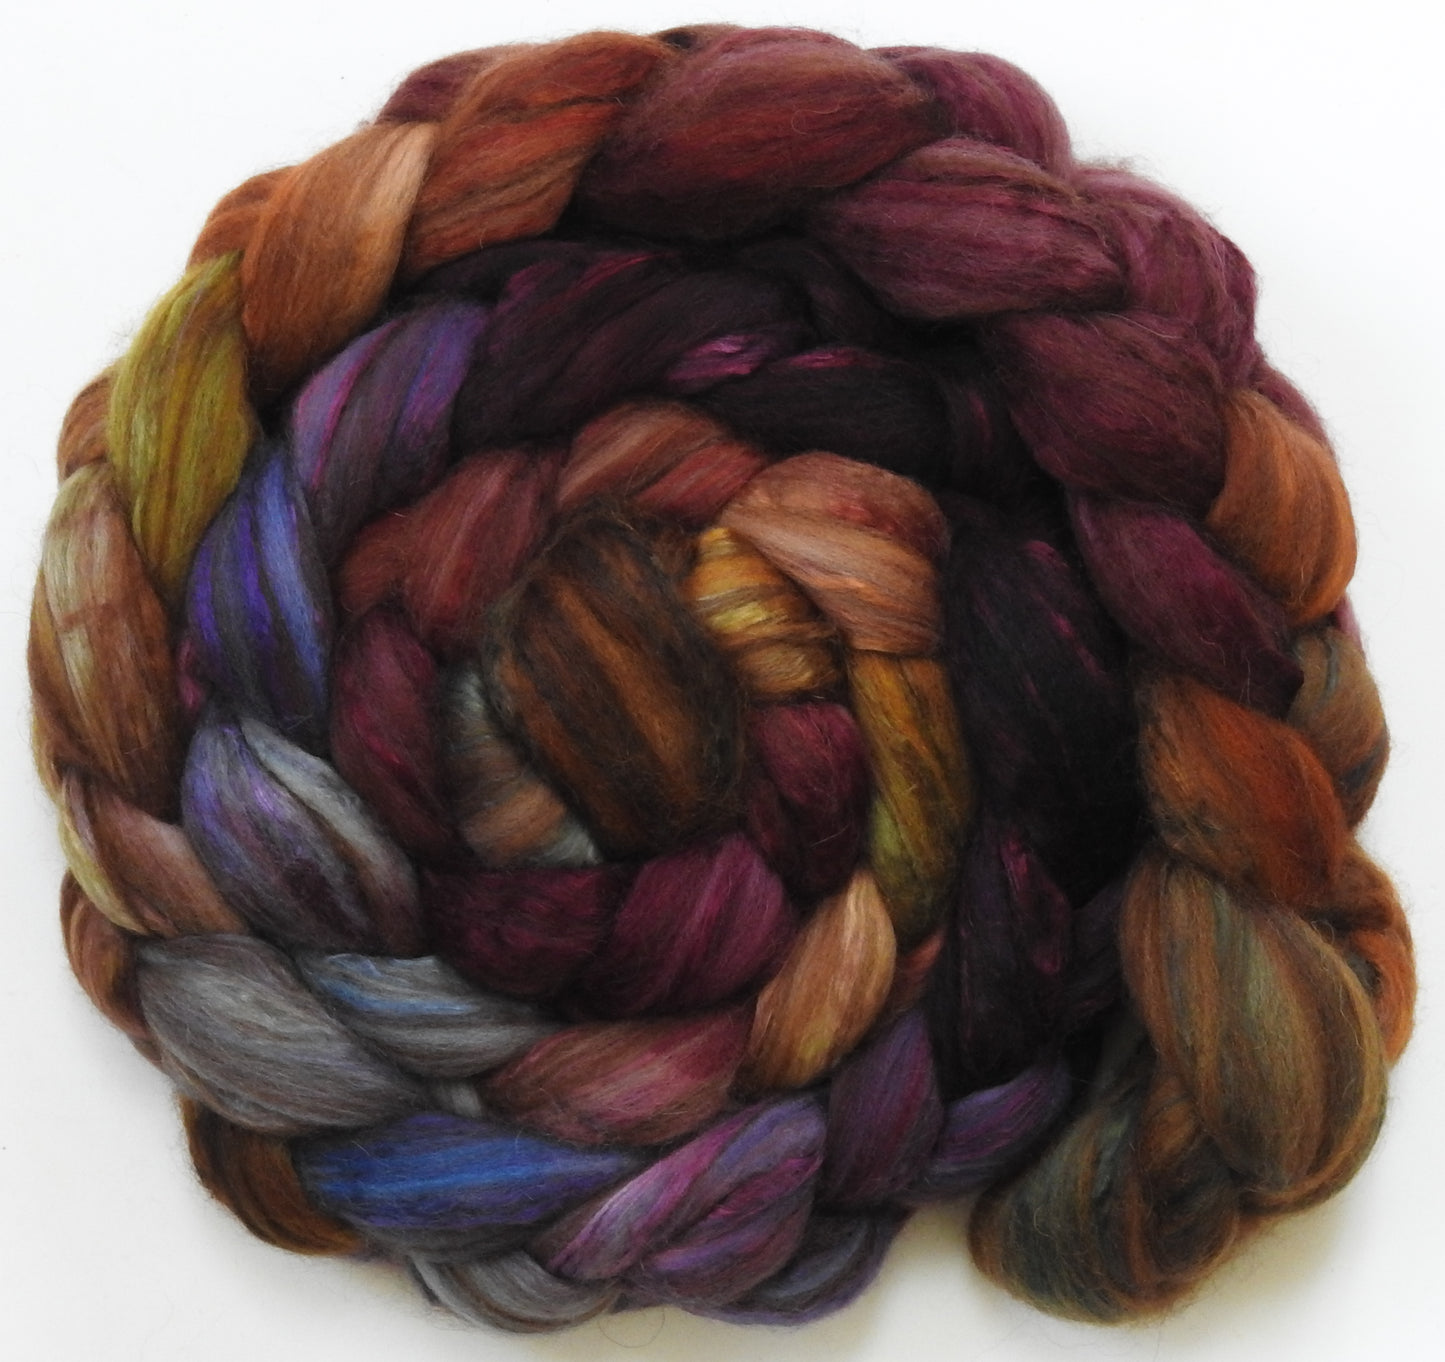 Penny for your Thoughts - 5.4 oz - 18.5 mic merino/ camel/ brown alpaca/ mulberry silk/ (40/20/20/20)